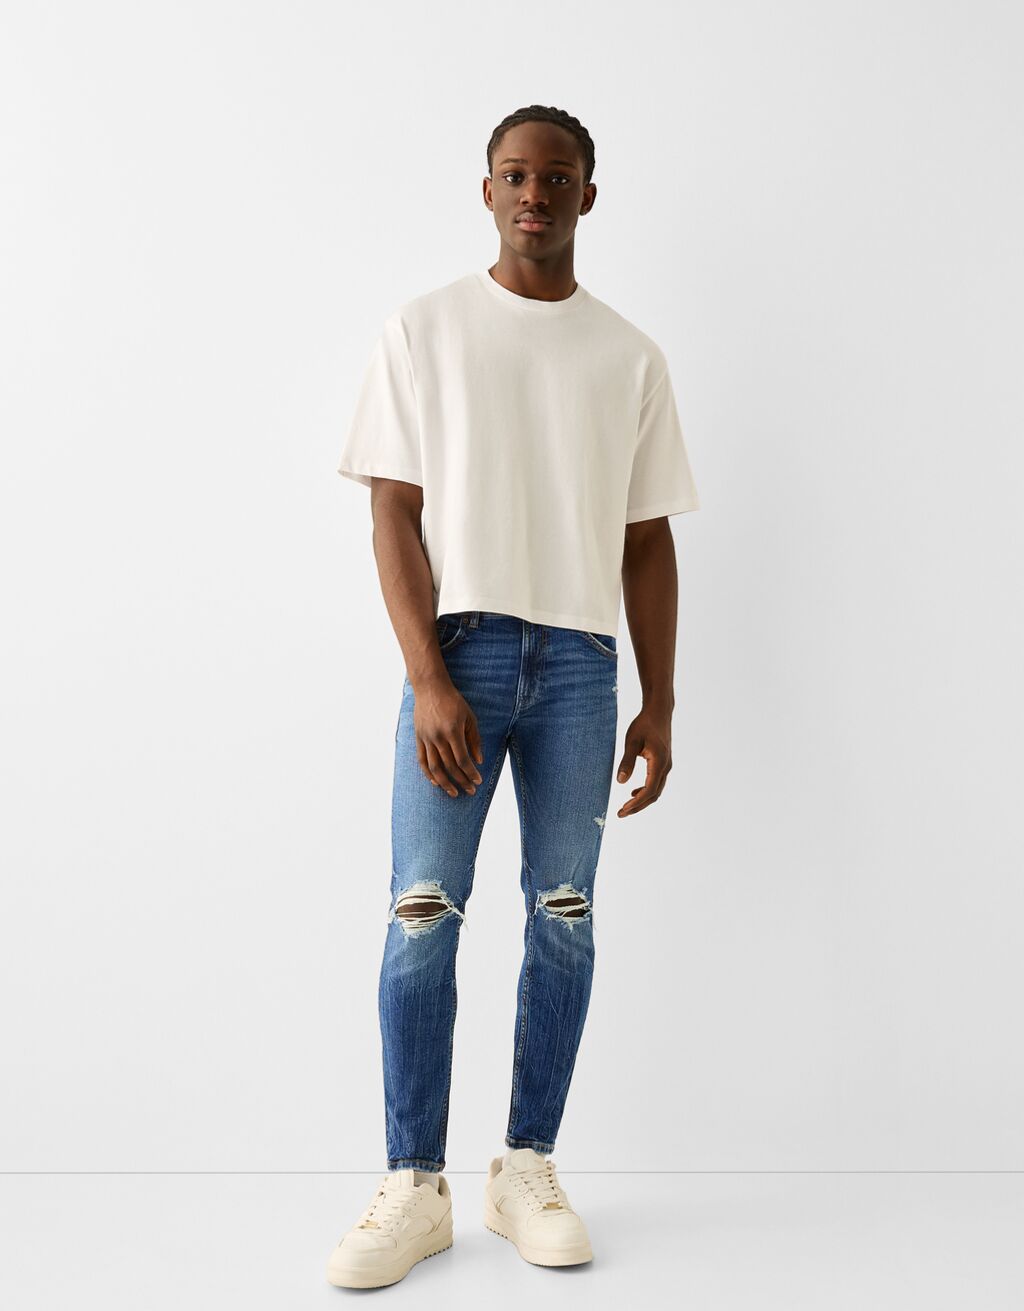 Men Denim Trousers Skinny Ripped Jeans Pants Stretch Jeans